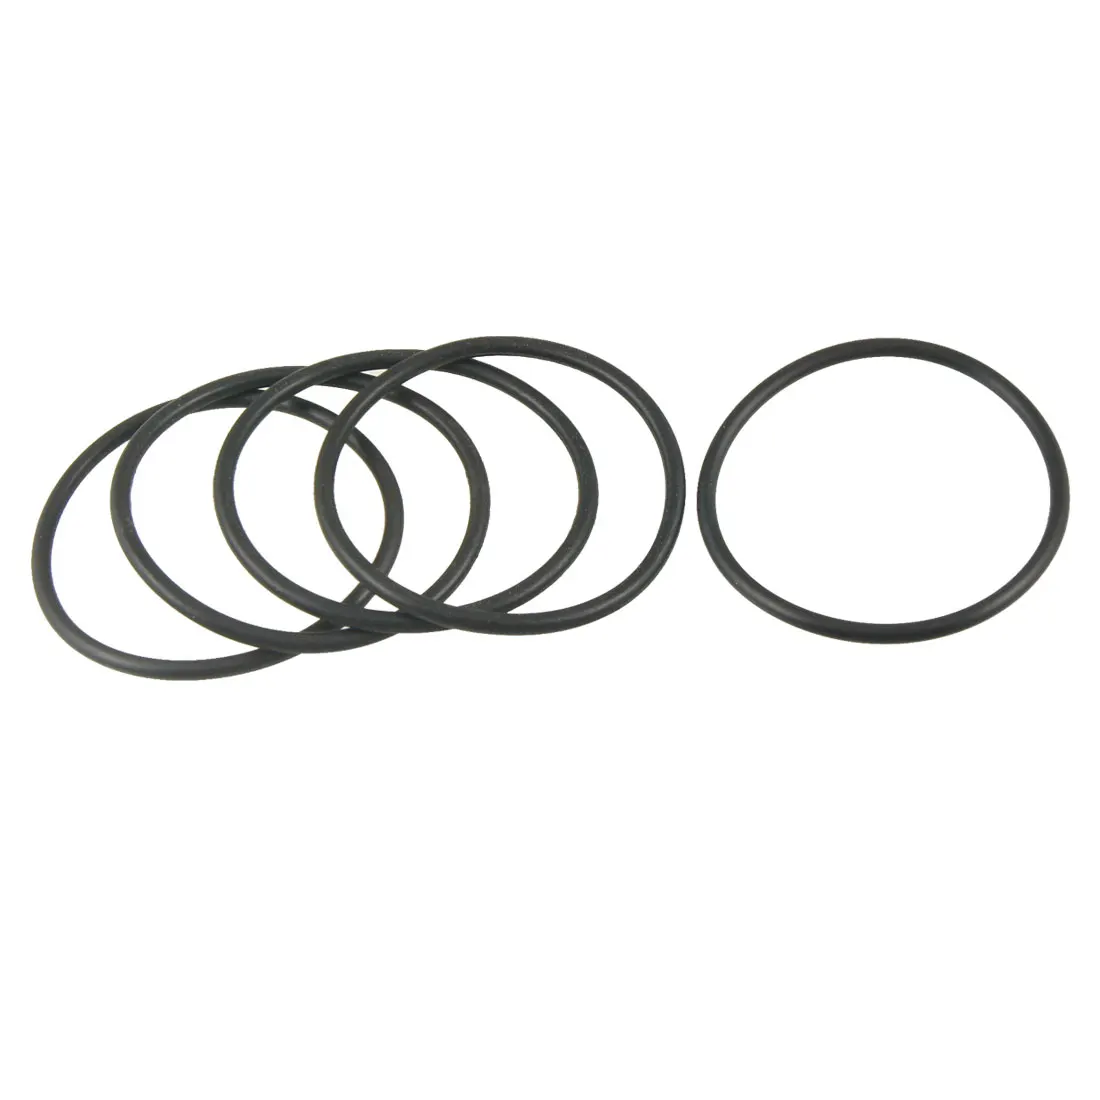 uxcell 62mm x 55mm x 3.5mm Rubber Sealing Oil Filter O Rings Gaskets 5 Pcs